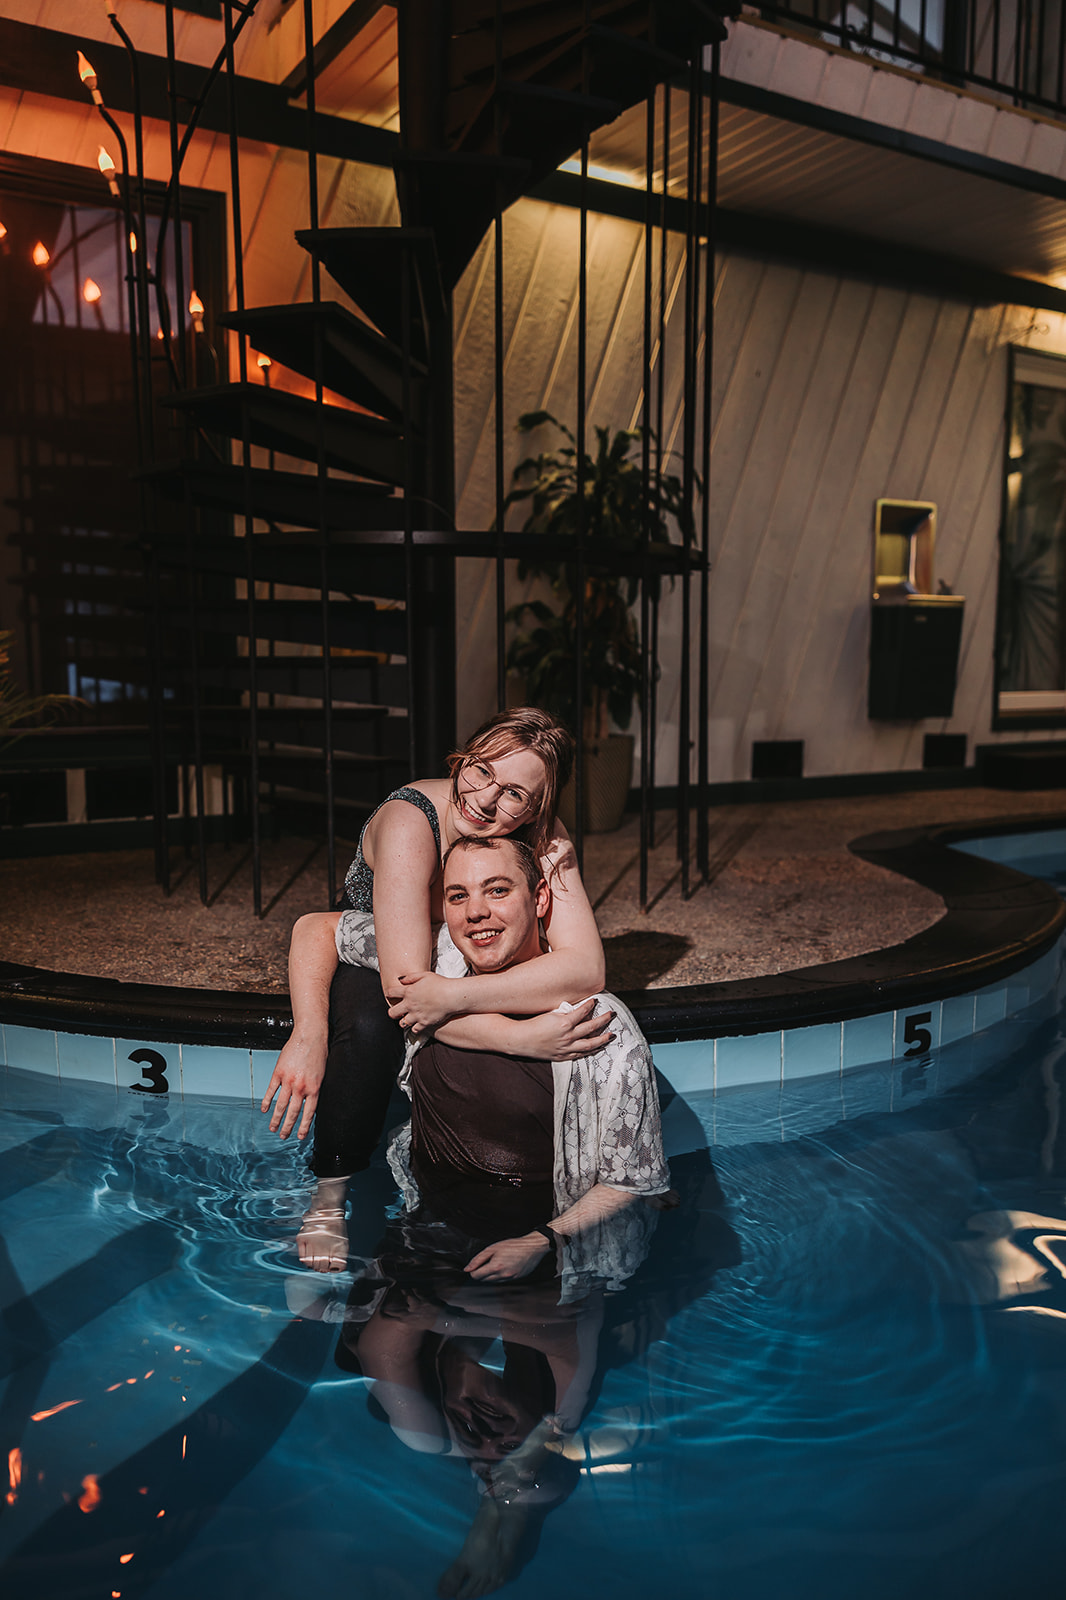 sweet nighttime couples photos at a pool in minneapolis